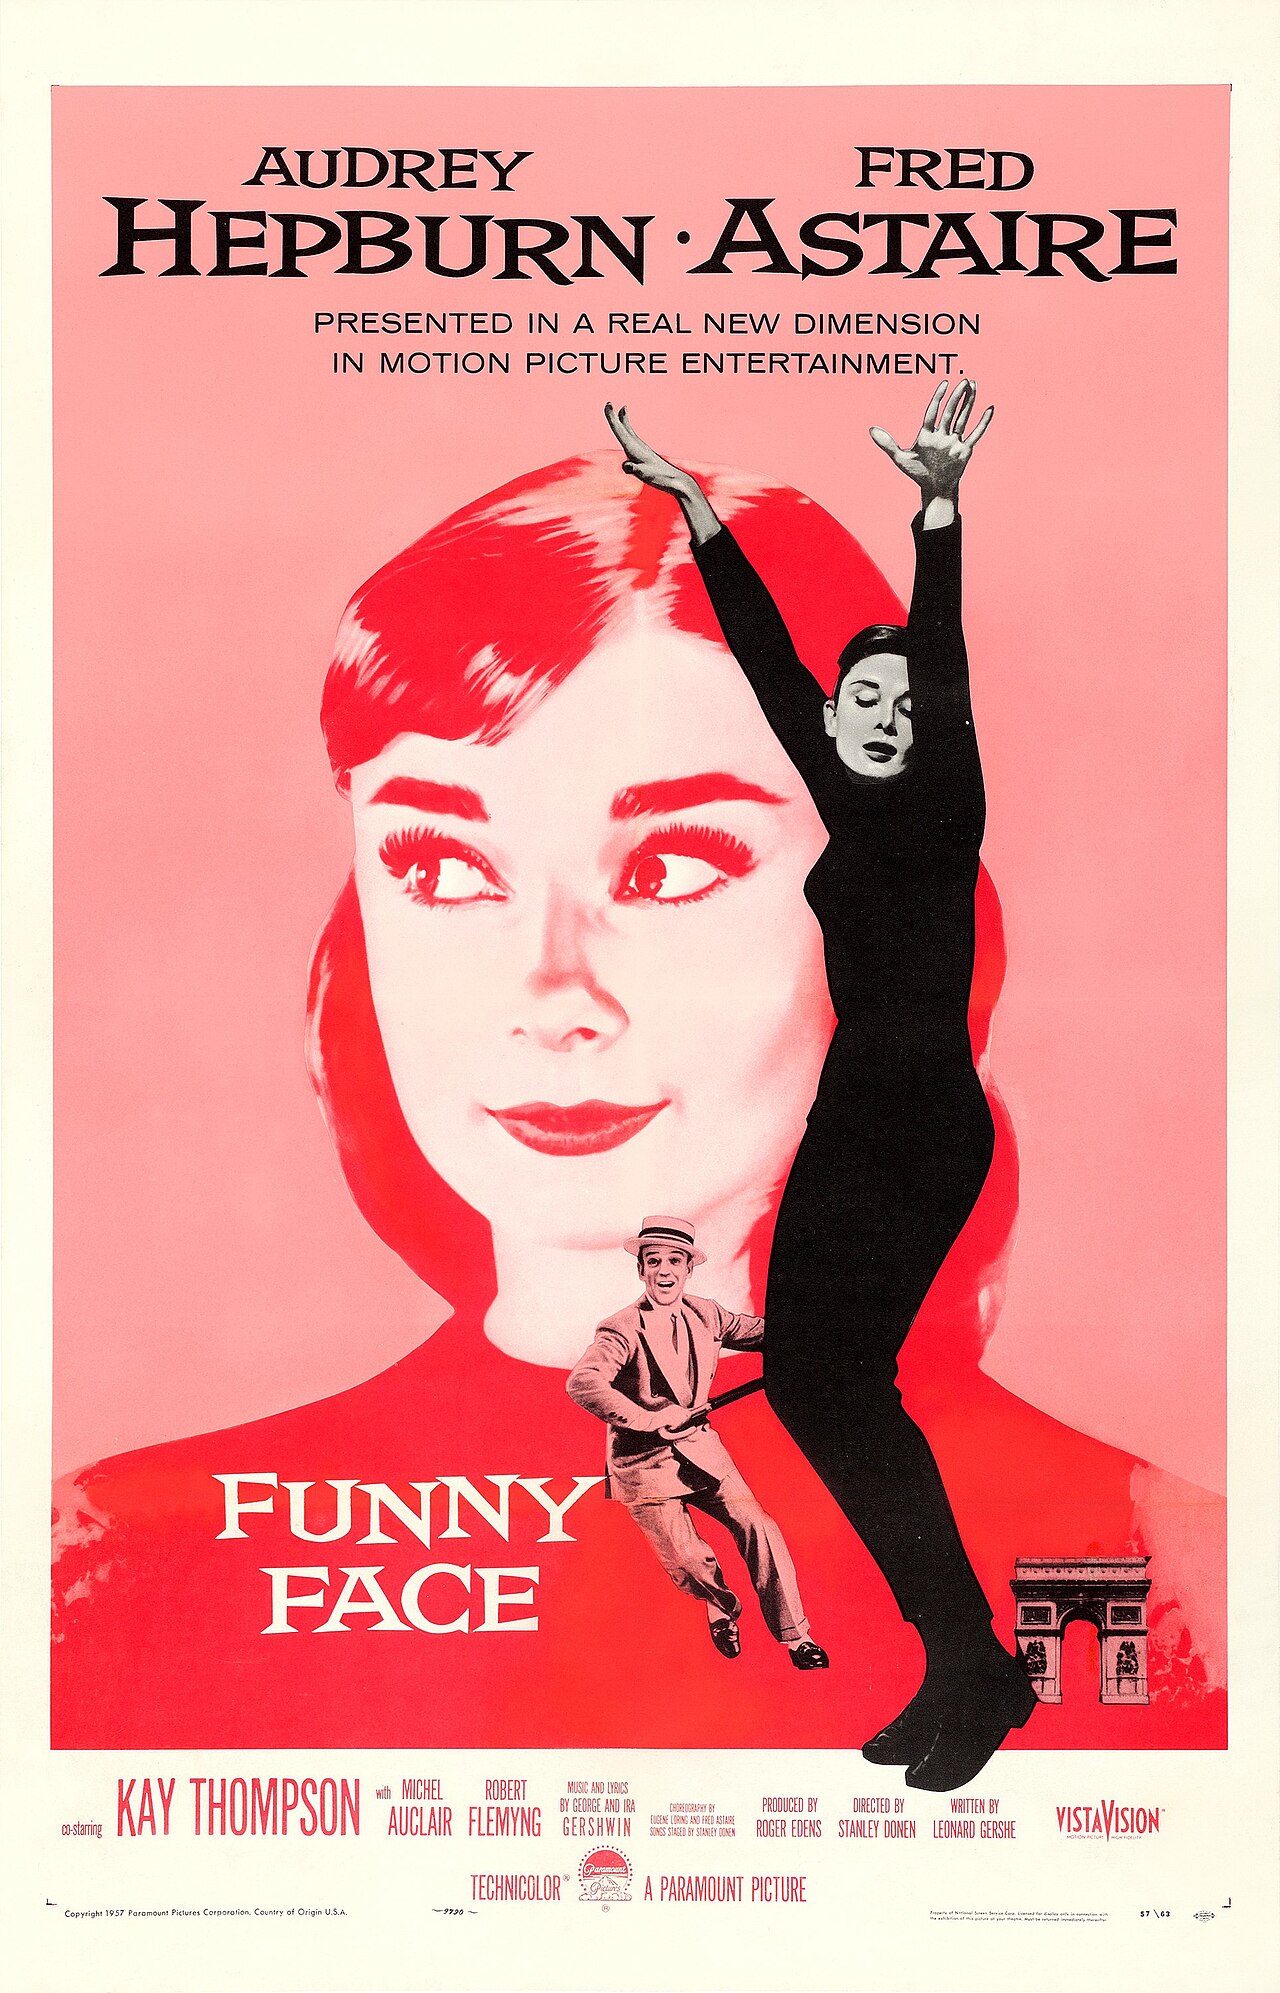 Theatrical poster for the American release of the 1957 film Funny Face. The illustration depicts the film's stars, Dutch-British actress Audrey Hepburn and American dancer-actor Fred Astaire.